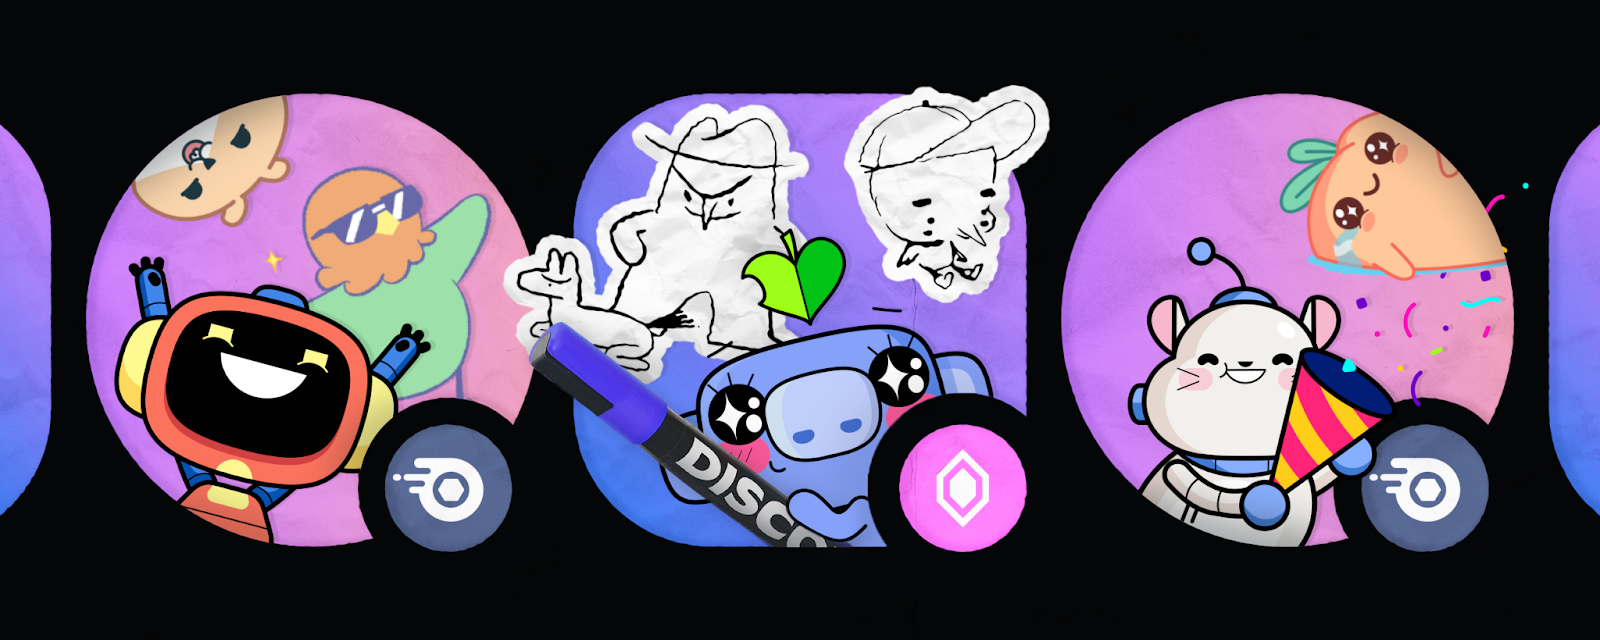 How To Find Discord Stickers